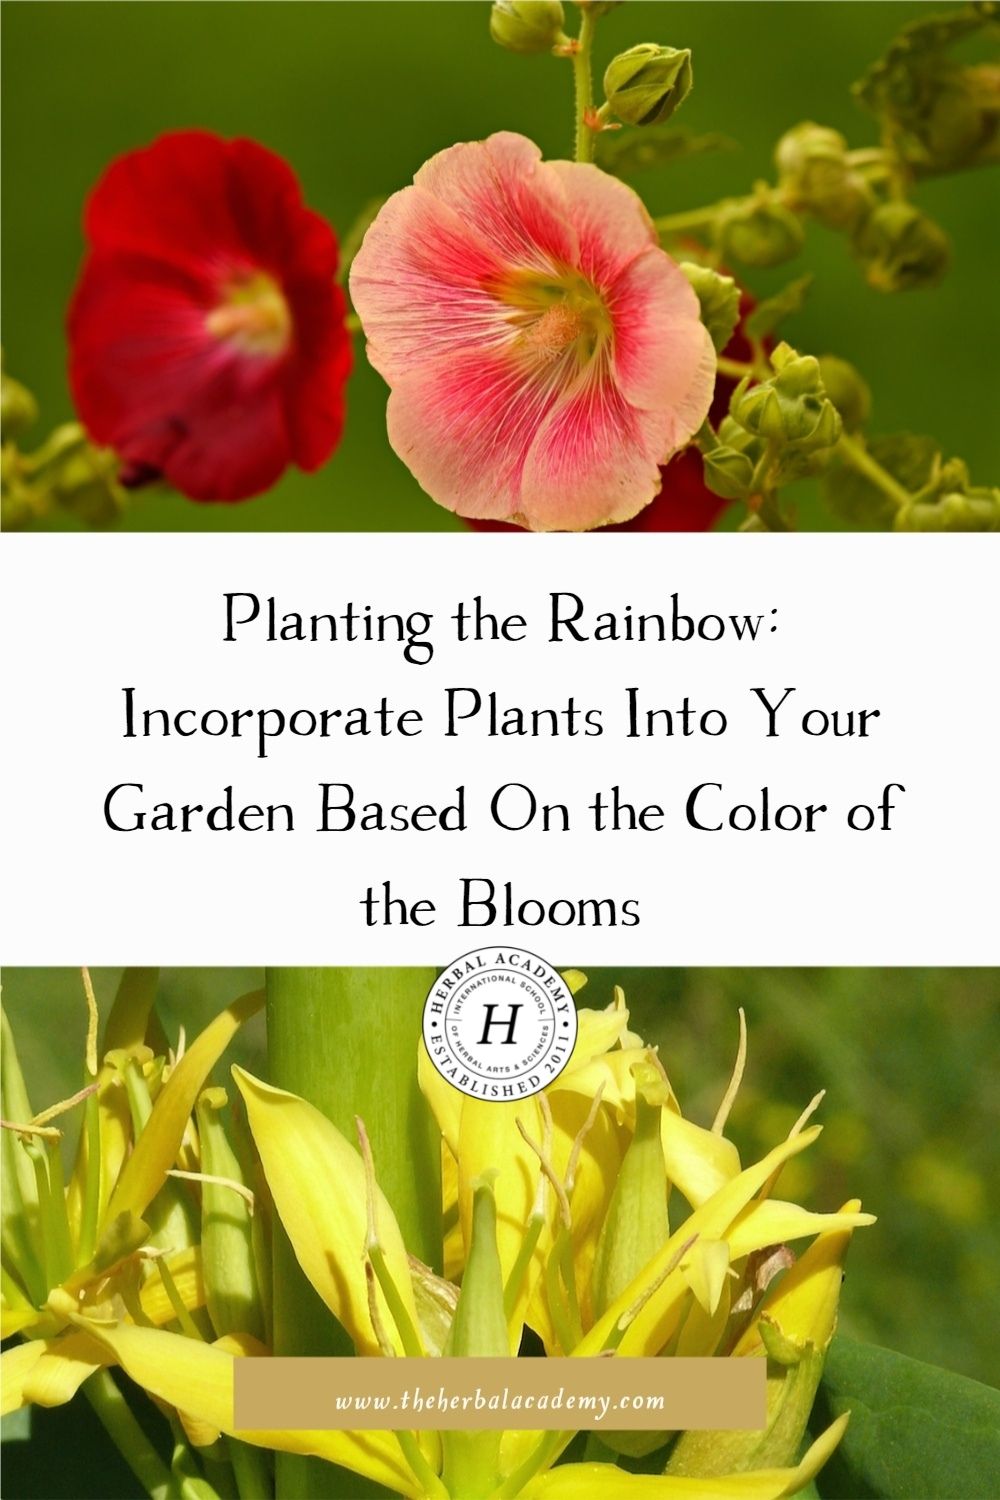 Planting the Rainbow: Incorporate Plants Into Your Garden Based On the Color of the Blooms | Herbal Academy | You can plant the rainbow by incorporating plants based on the bloom's color, bringing aesthetics and function together in perfect gardening harmony.